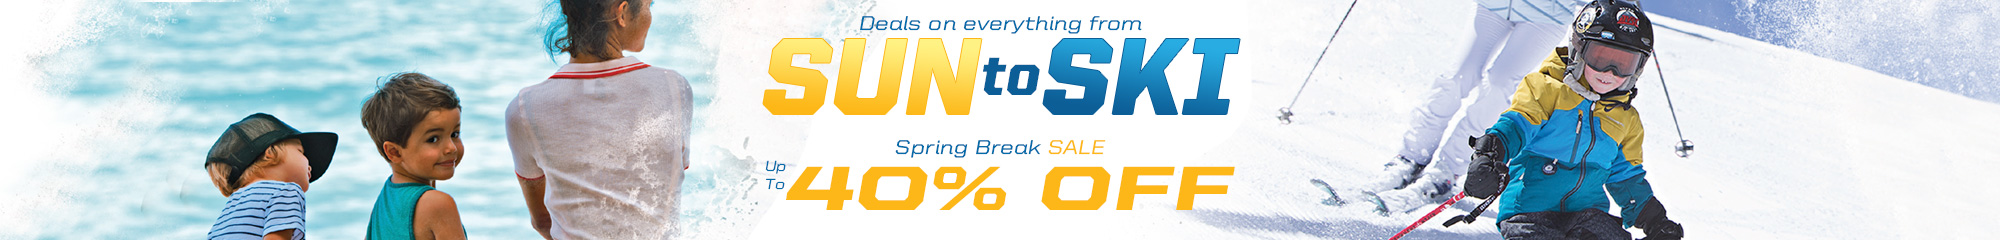 Deals on everything from Sun to Ski. Spring break sale up to 40% off.